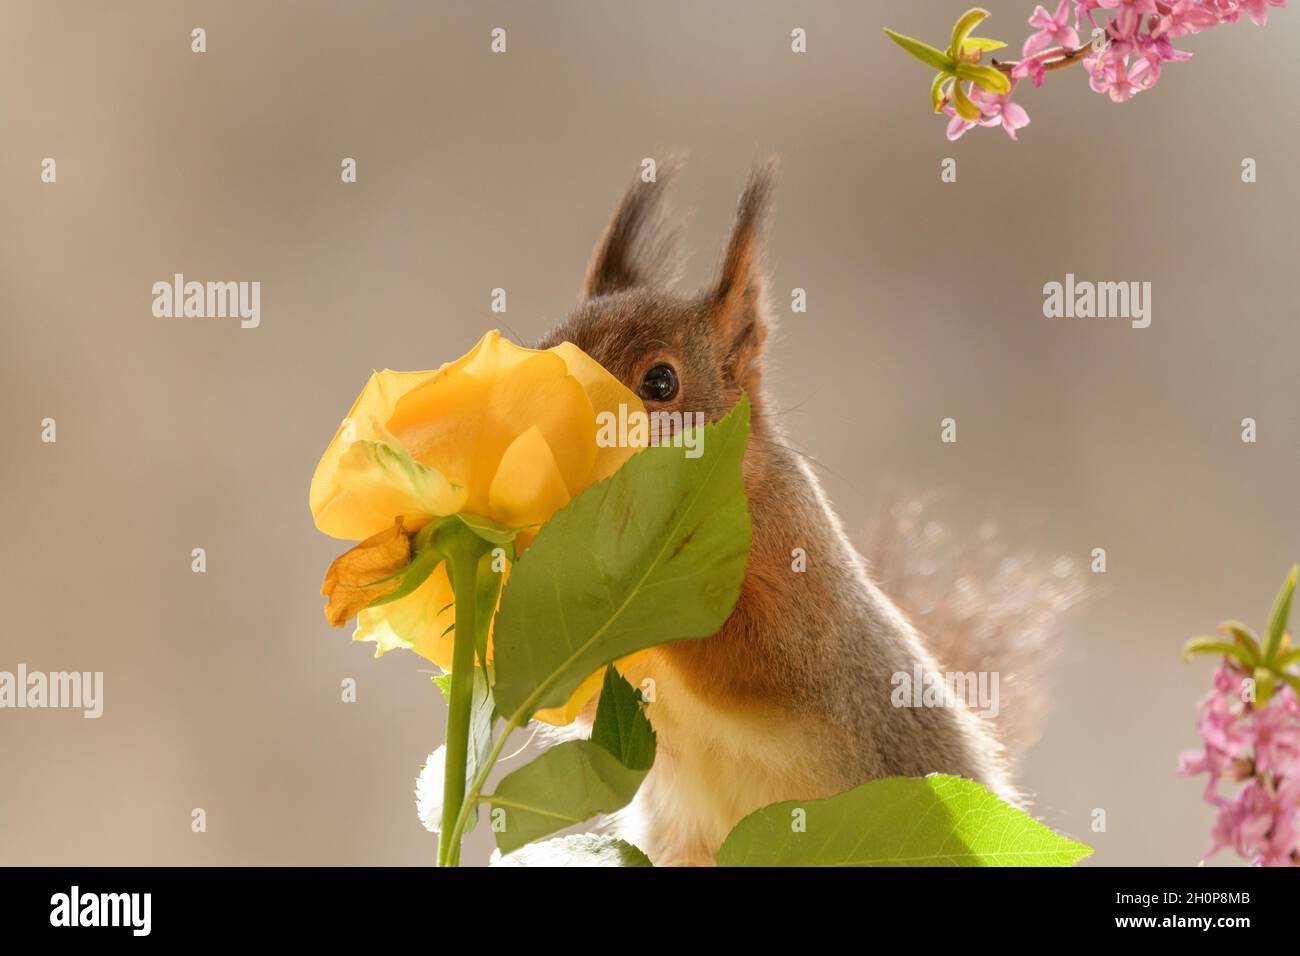 Red squirrel is smelling a orange yellow rose with a Daphne mezereum branch Stock Photo